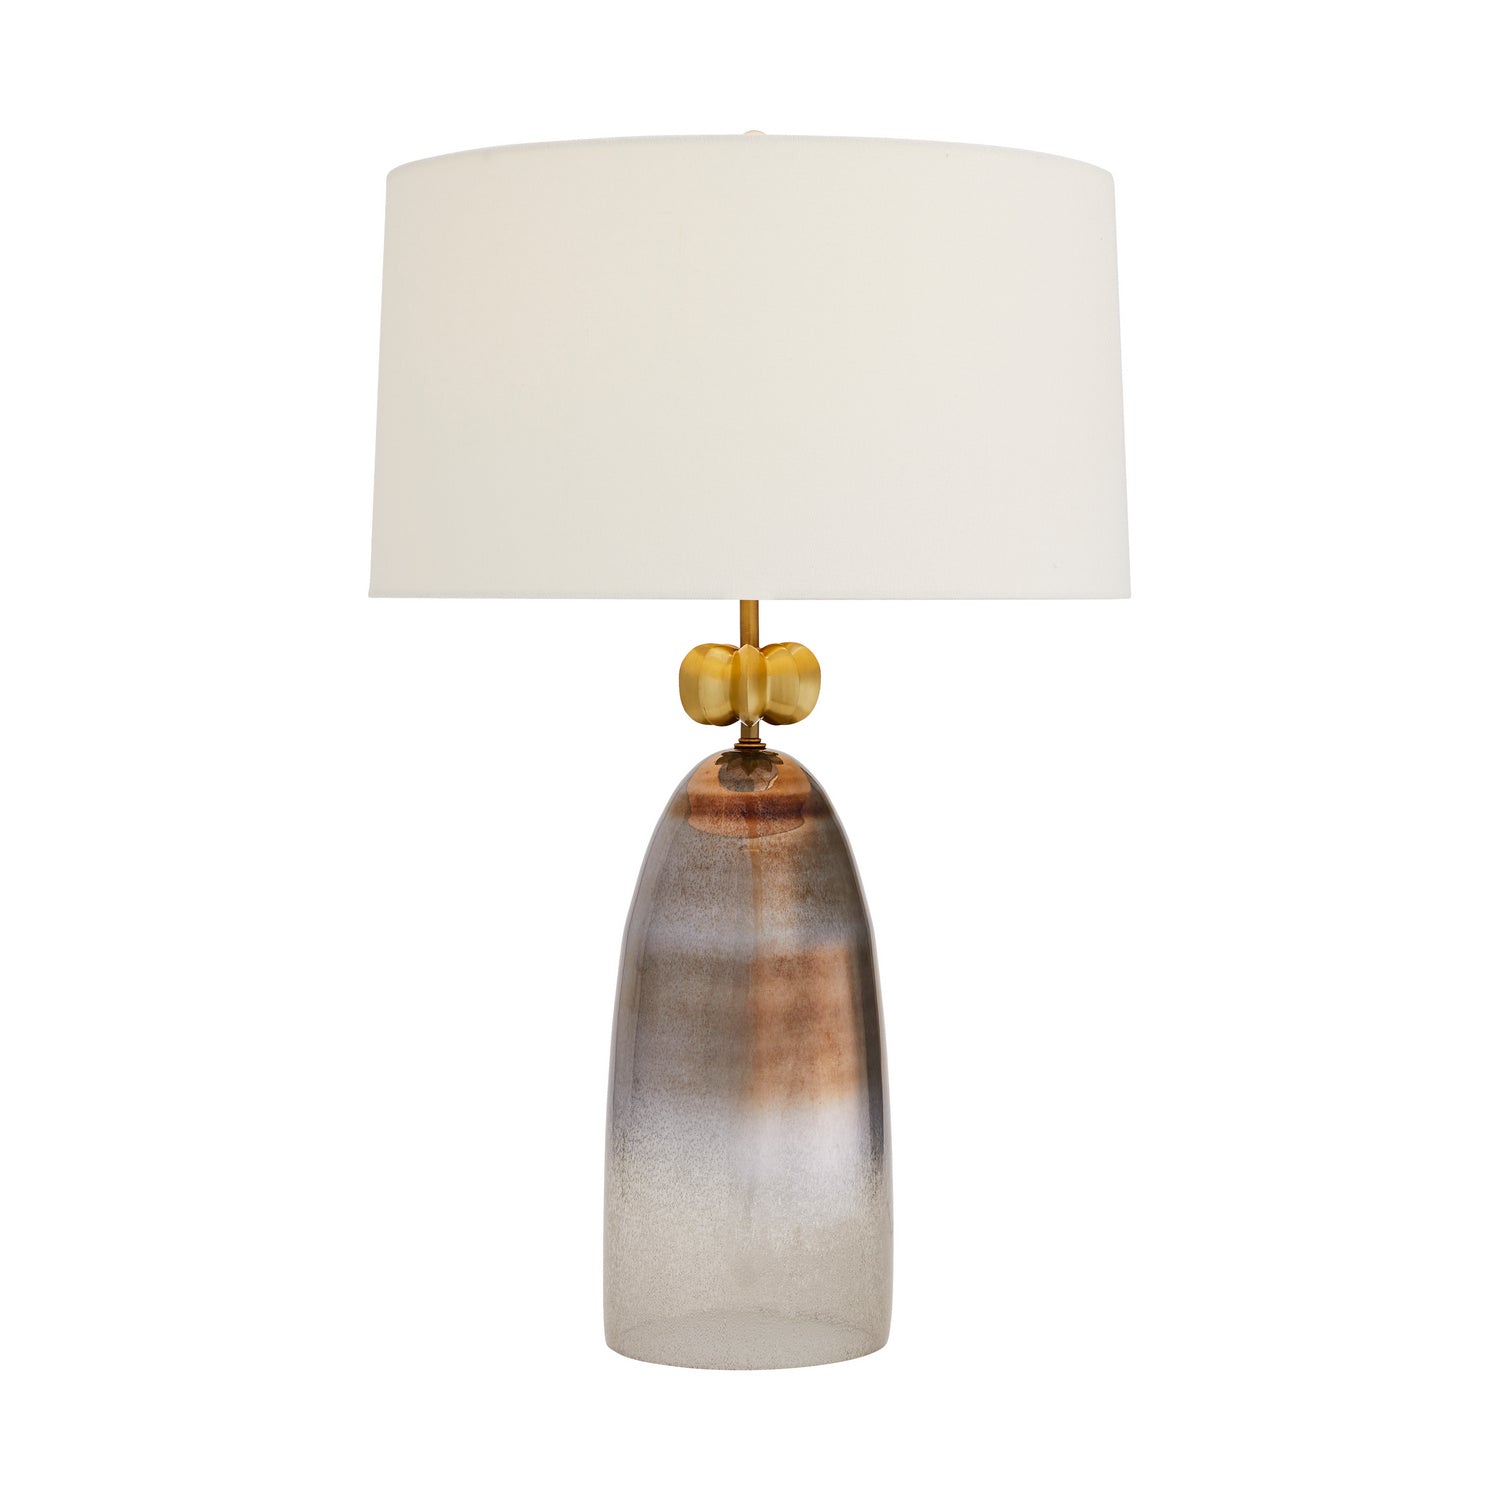 One Light Lamp from the Haley collection in Smoke Luster Ombre finish